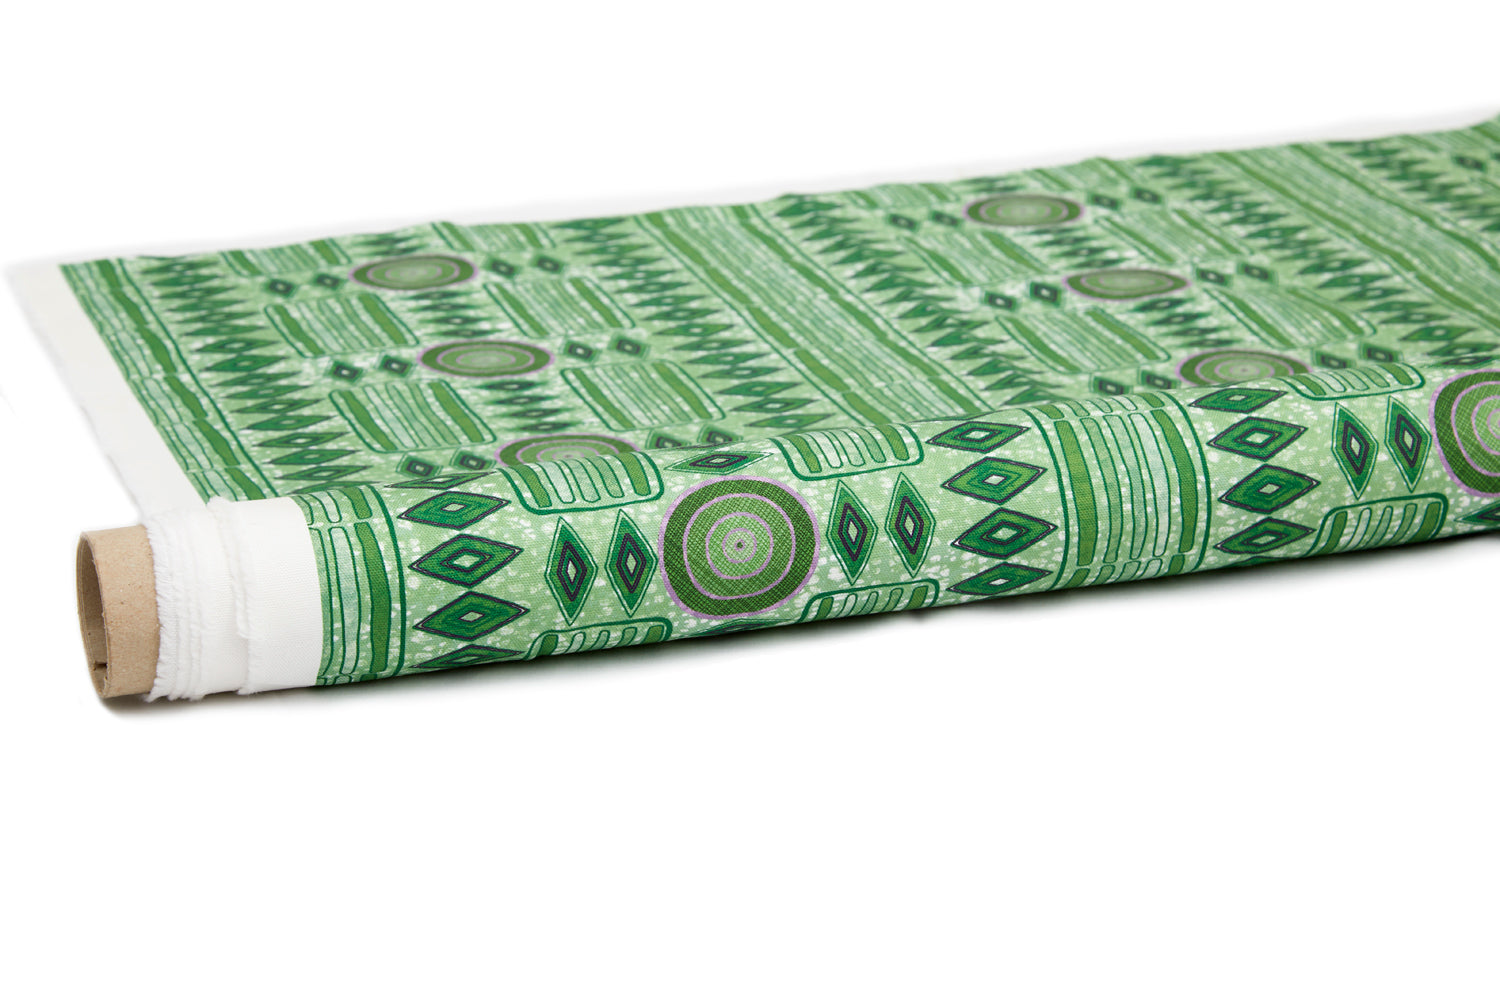 Partially unrolled fabric in a playful geometric stripe print in shades of green with purple accents.